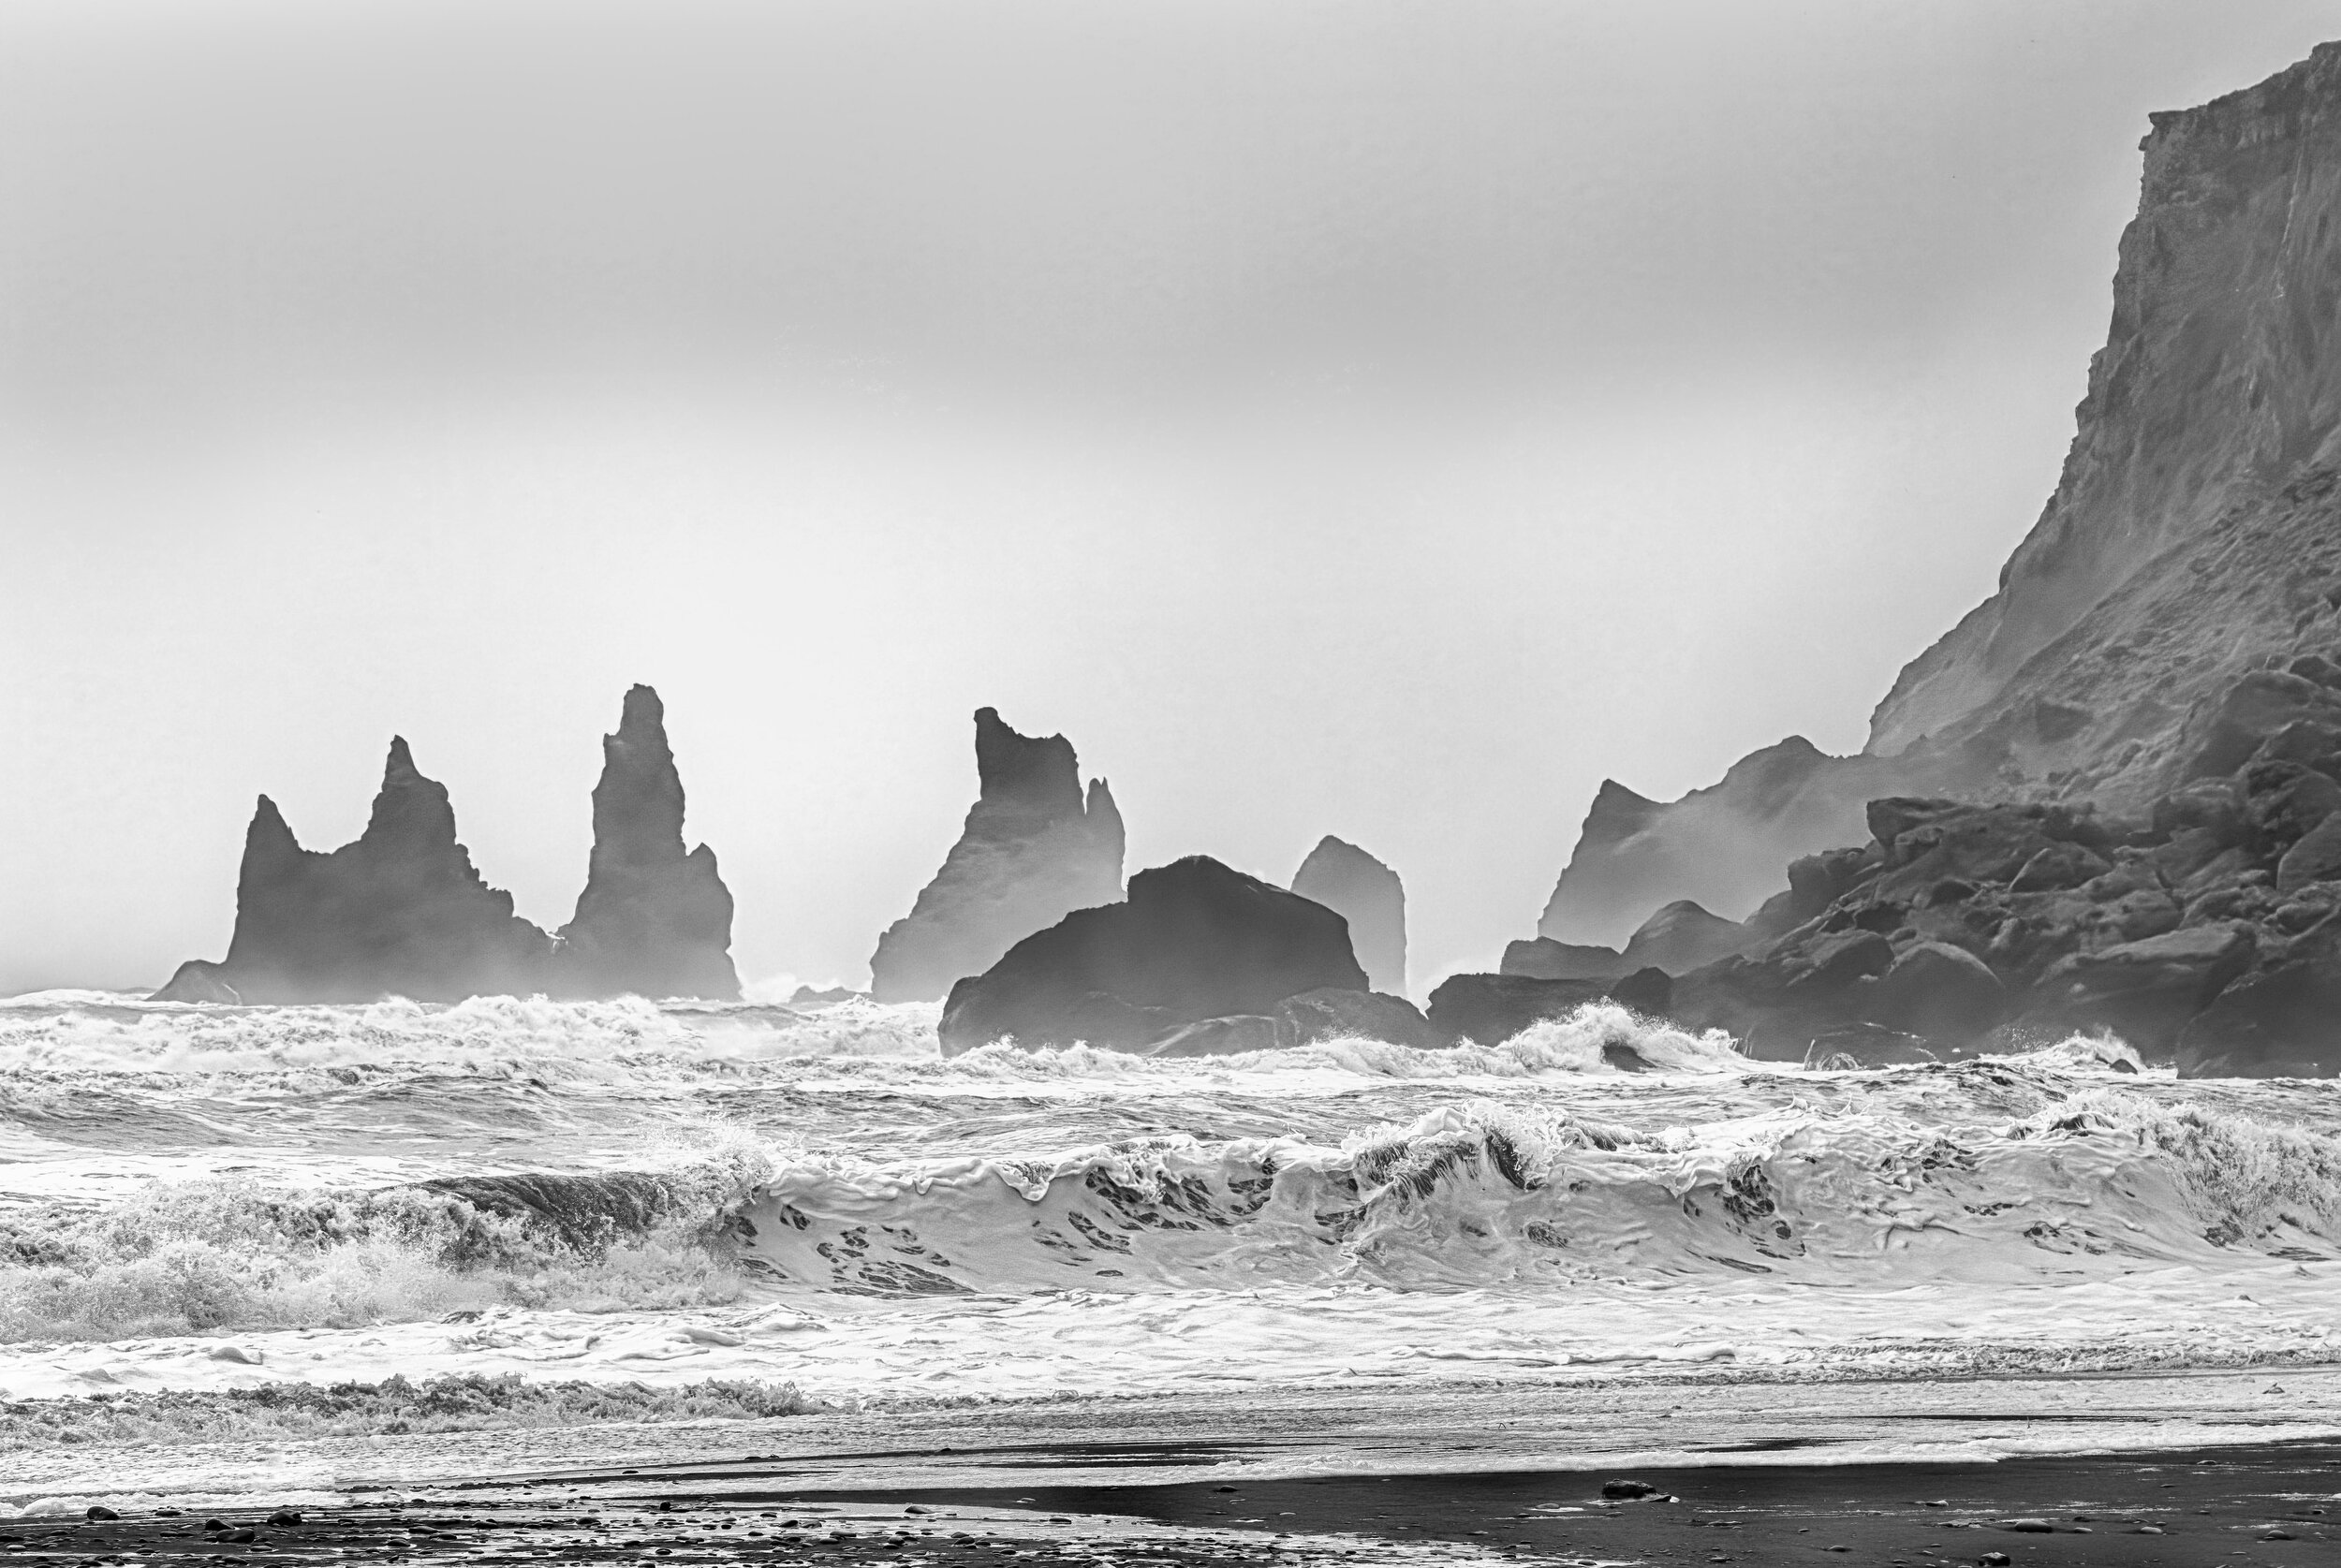 "Sea Stacks on a Stormy Day"